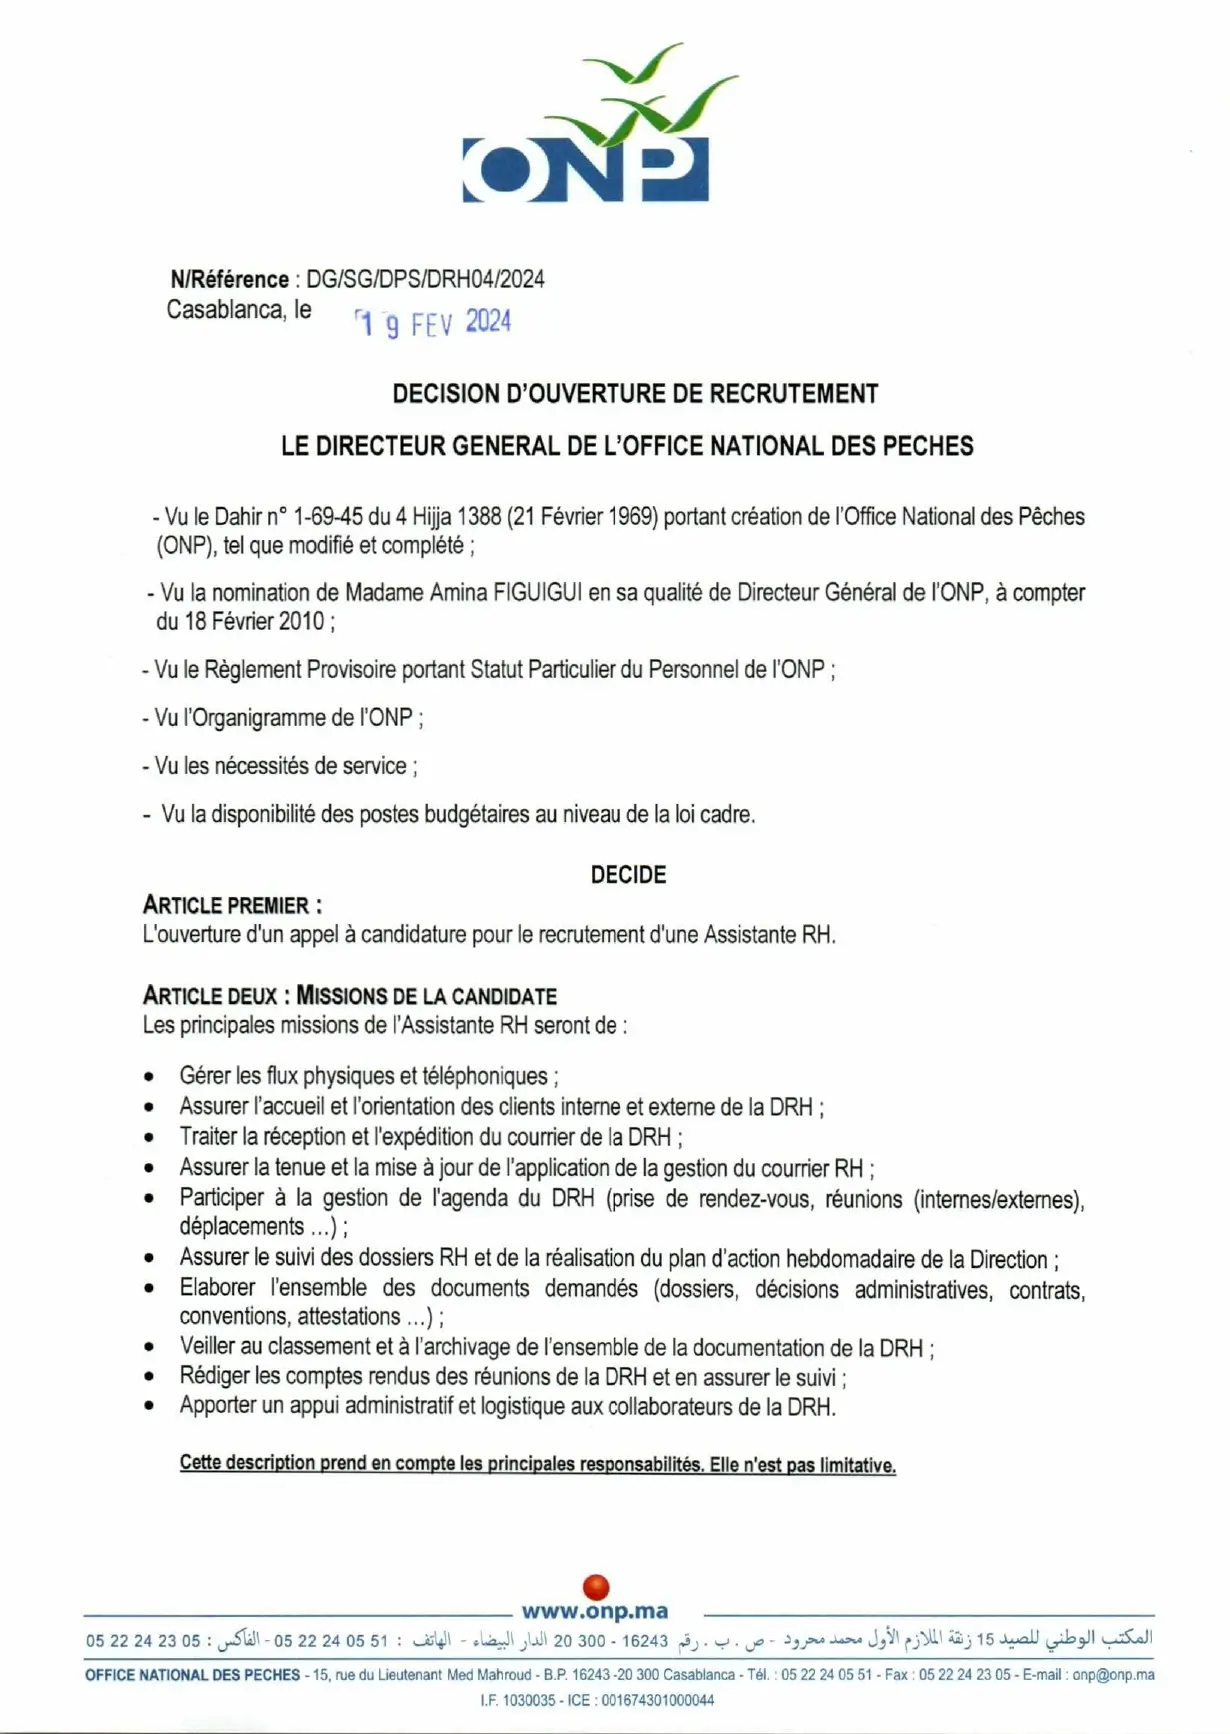 Office National des Pêches recrute Assistant(e) RH